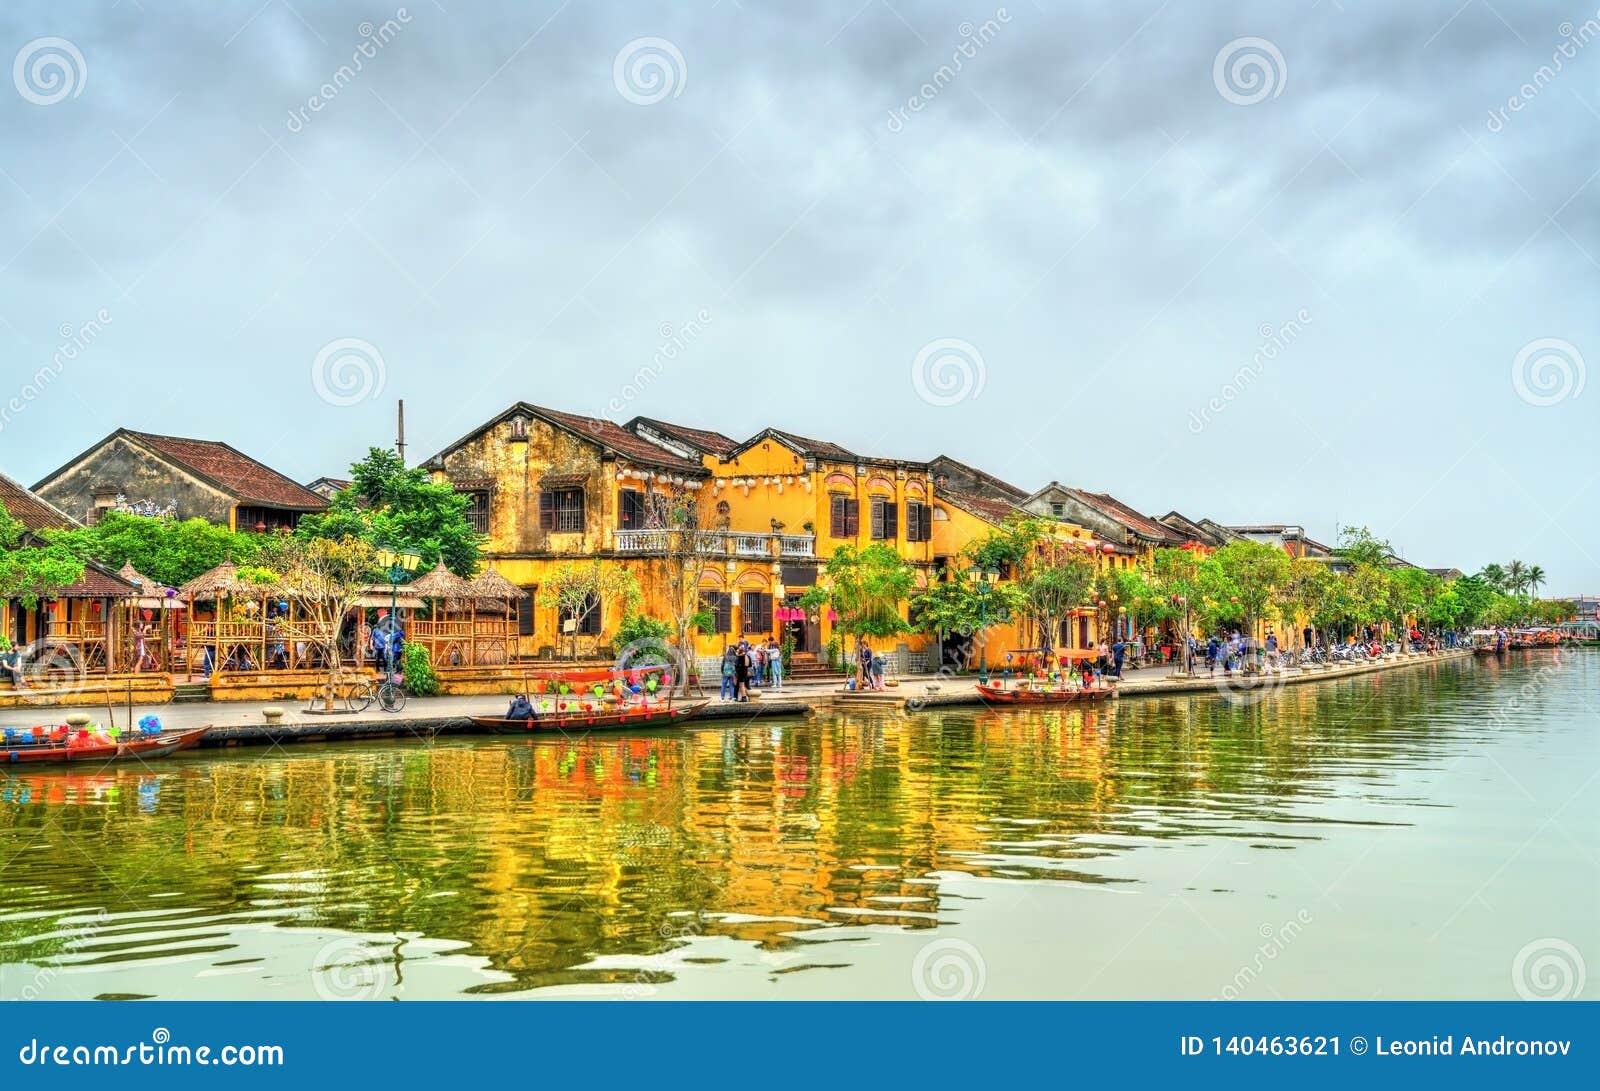 old quarter of hoi an town in vietnam